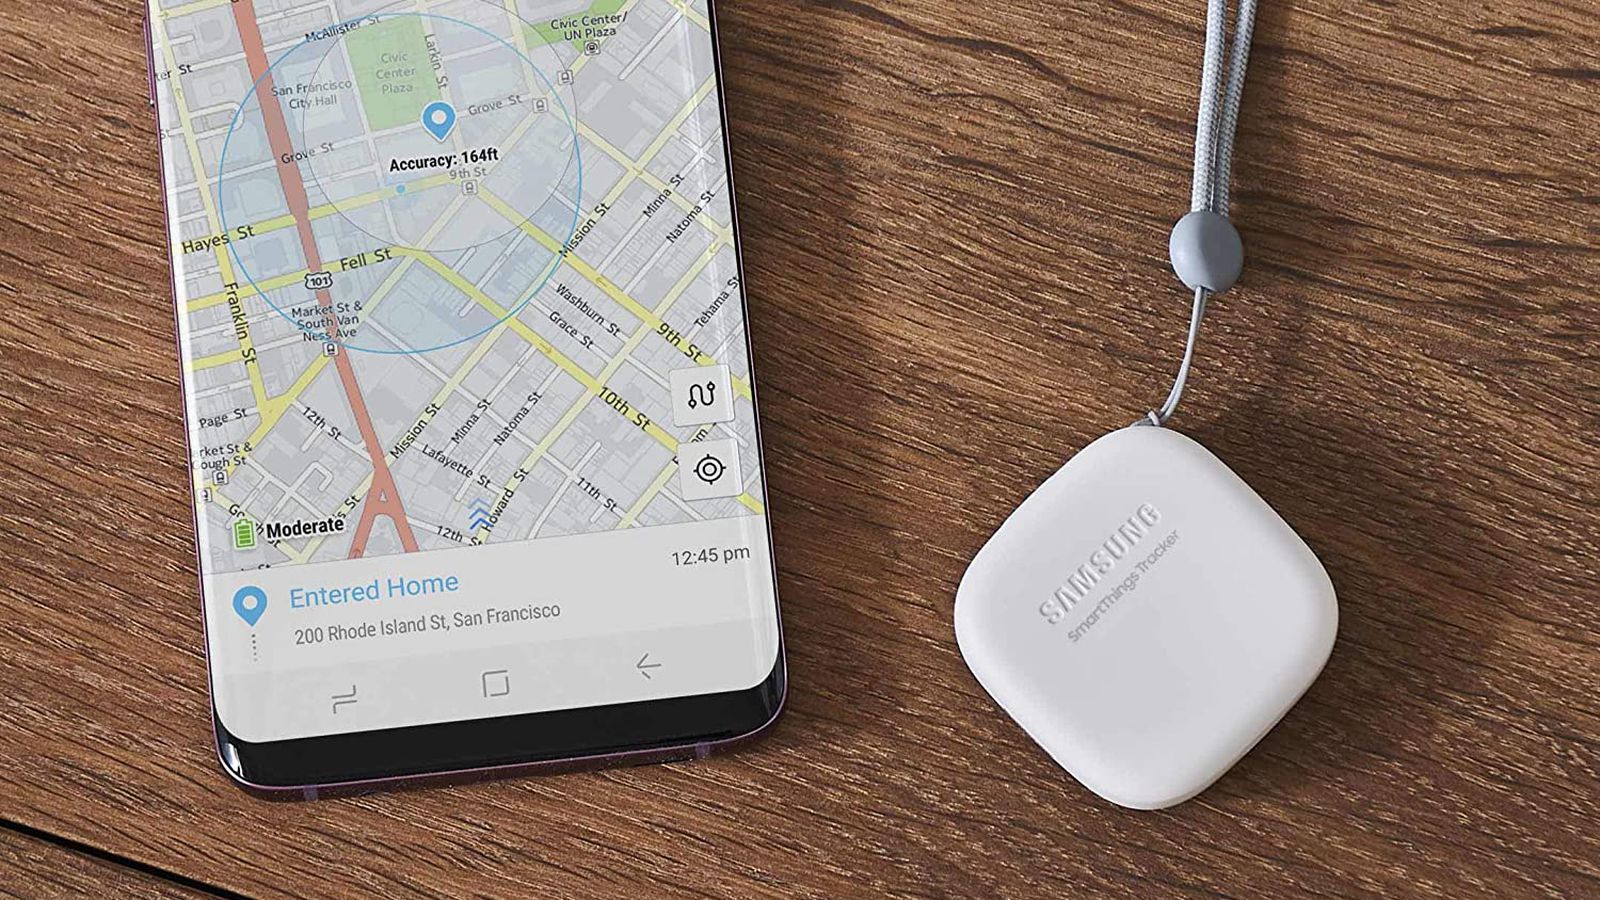 Samsung Reportedly Developing 'Galaxy Smart Tag' Rival to Apple AirTags -  MacRumors